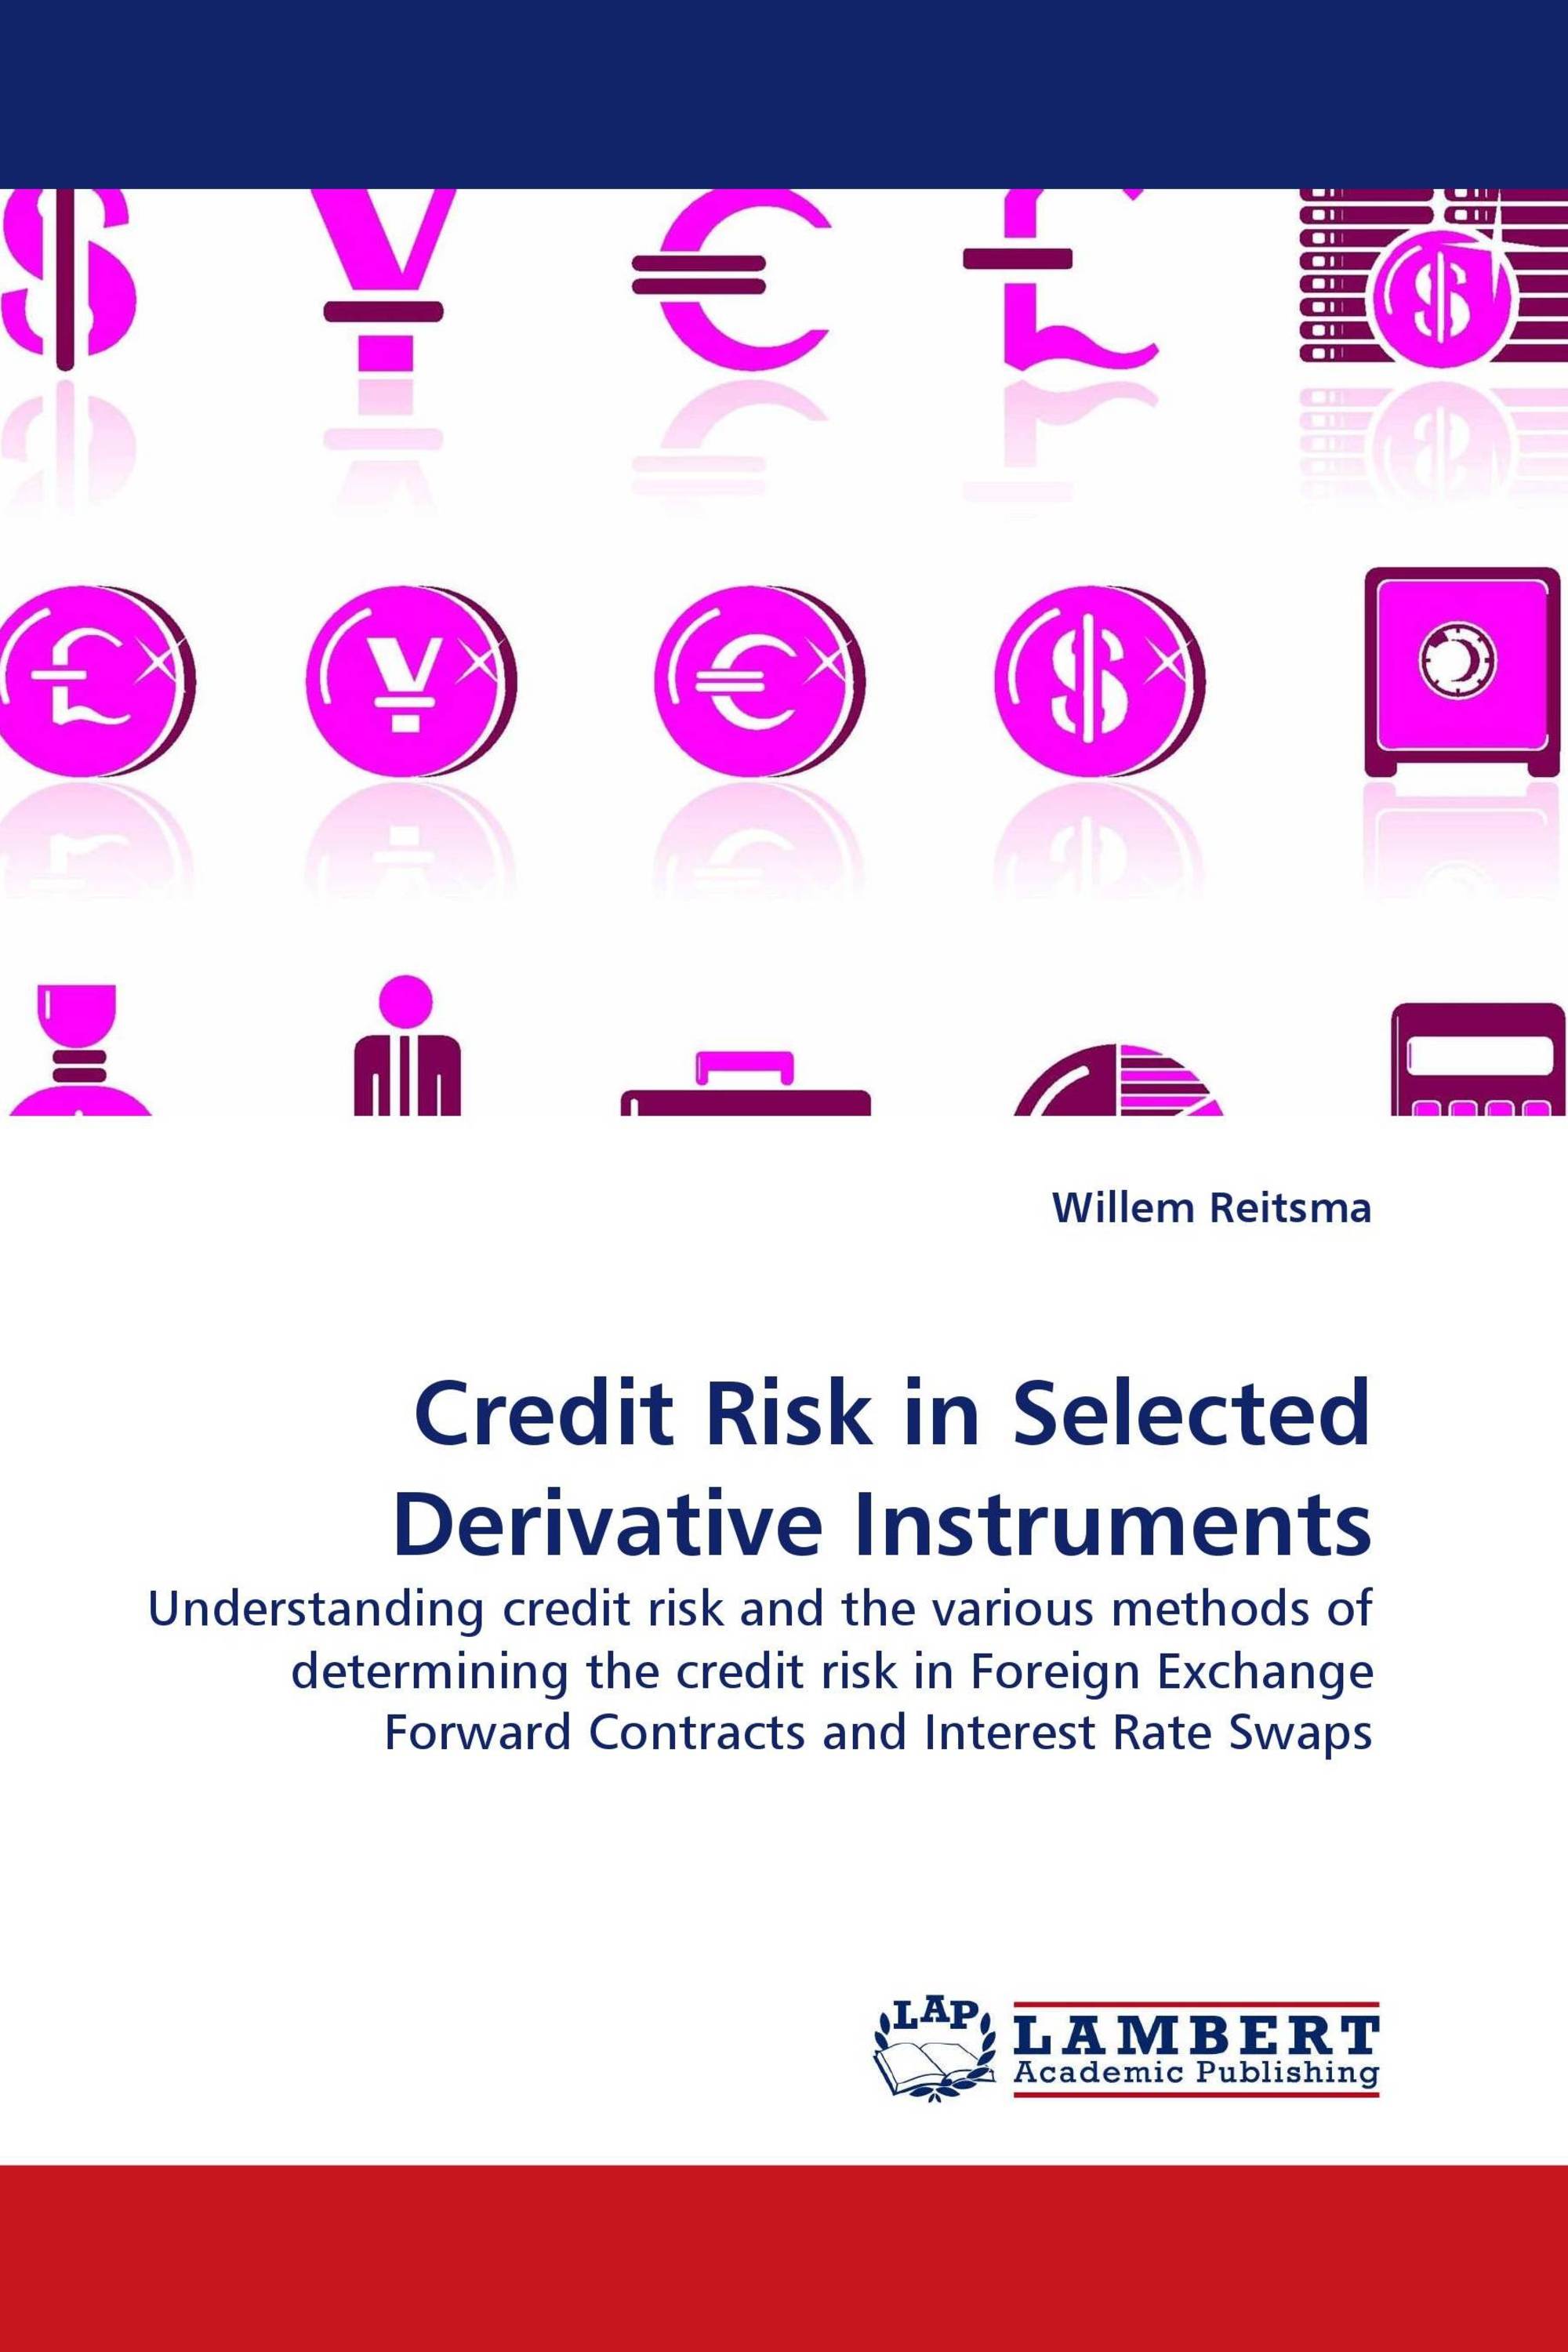 Credit Risk in Selected Derivative Instruments